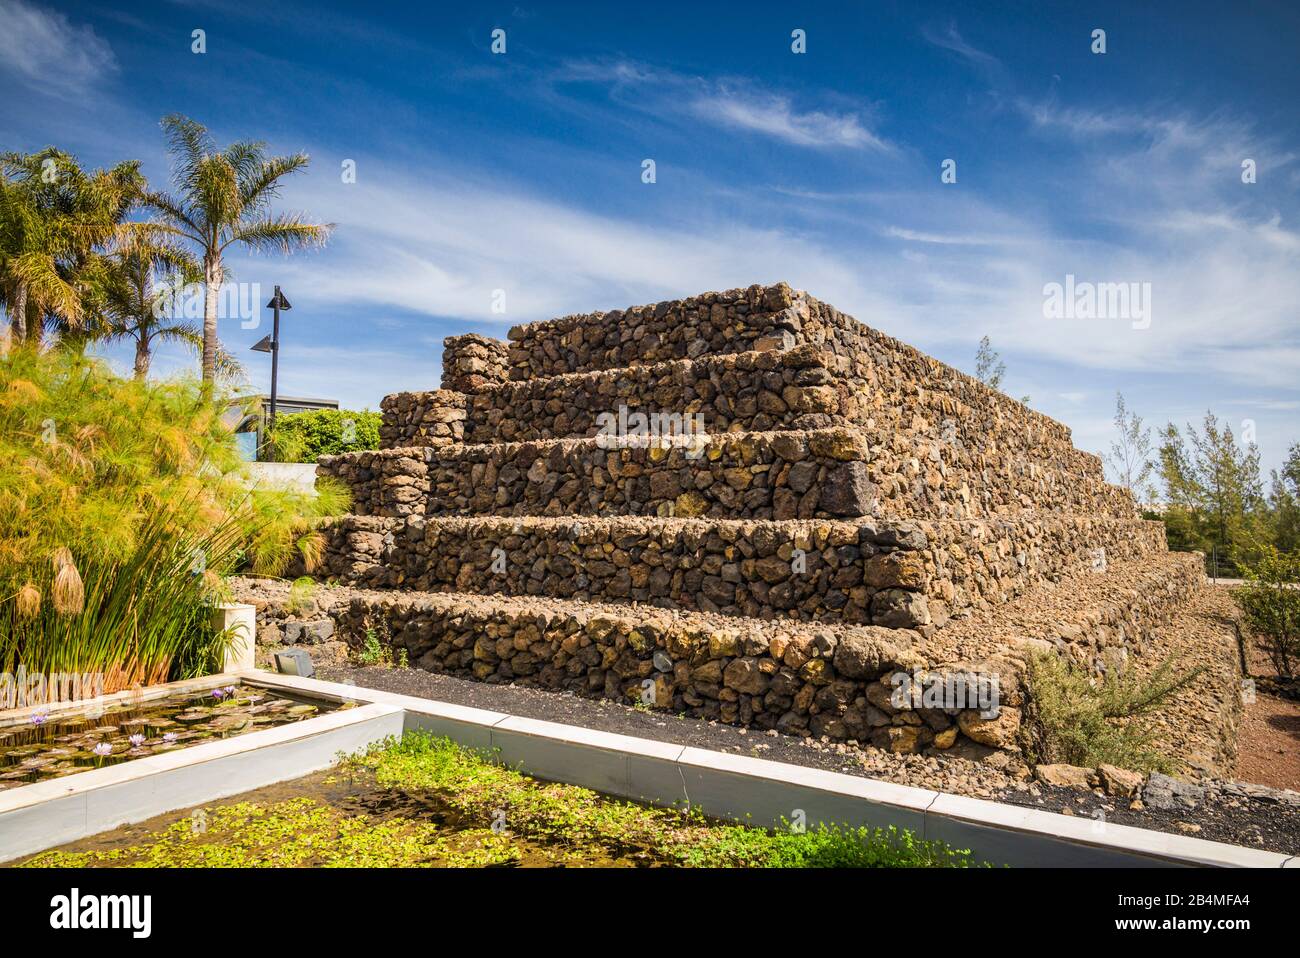 Spain, Canary Islands, Tenerife Island, Guimar, Piramides de Guimar, eco site founded by explorer Thor Heyerdahl, pyramids built by early settlers of Tennerife Stock Photo